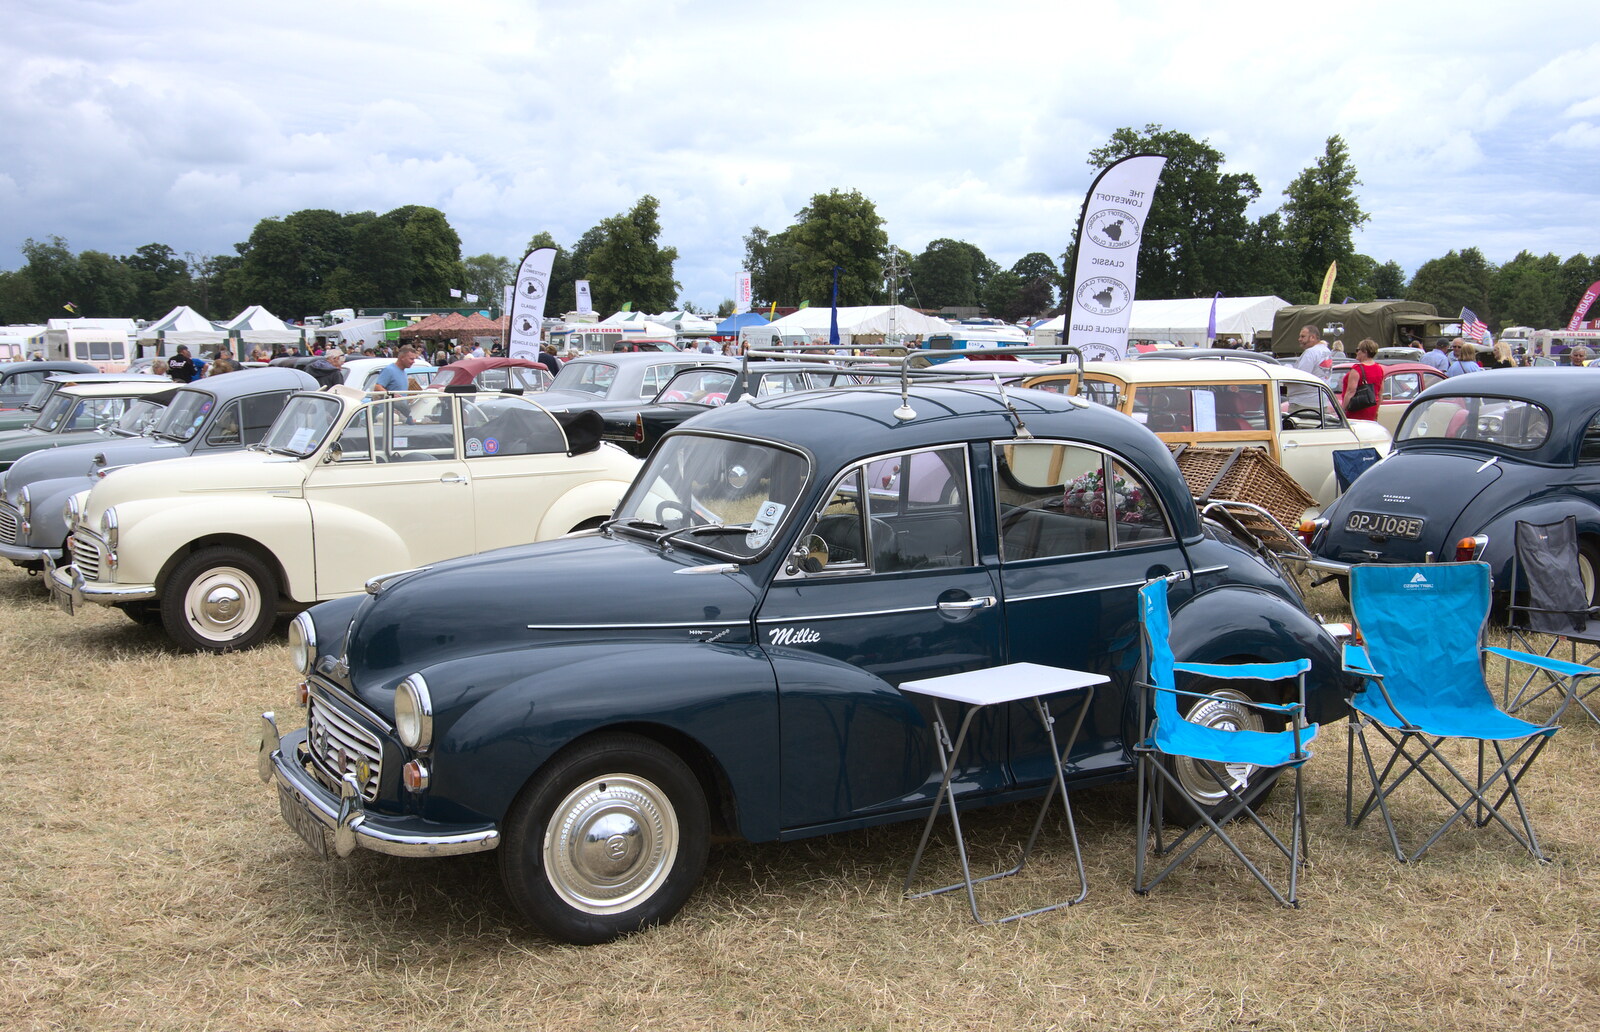 A Morris Minor called Millie from The Formerly-Known-As-The-Eye-Show, Palgrave, Suffolk - 17th June 2018